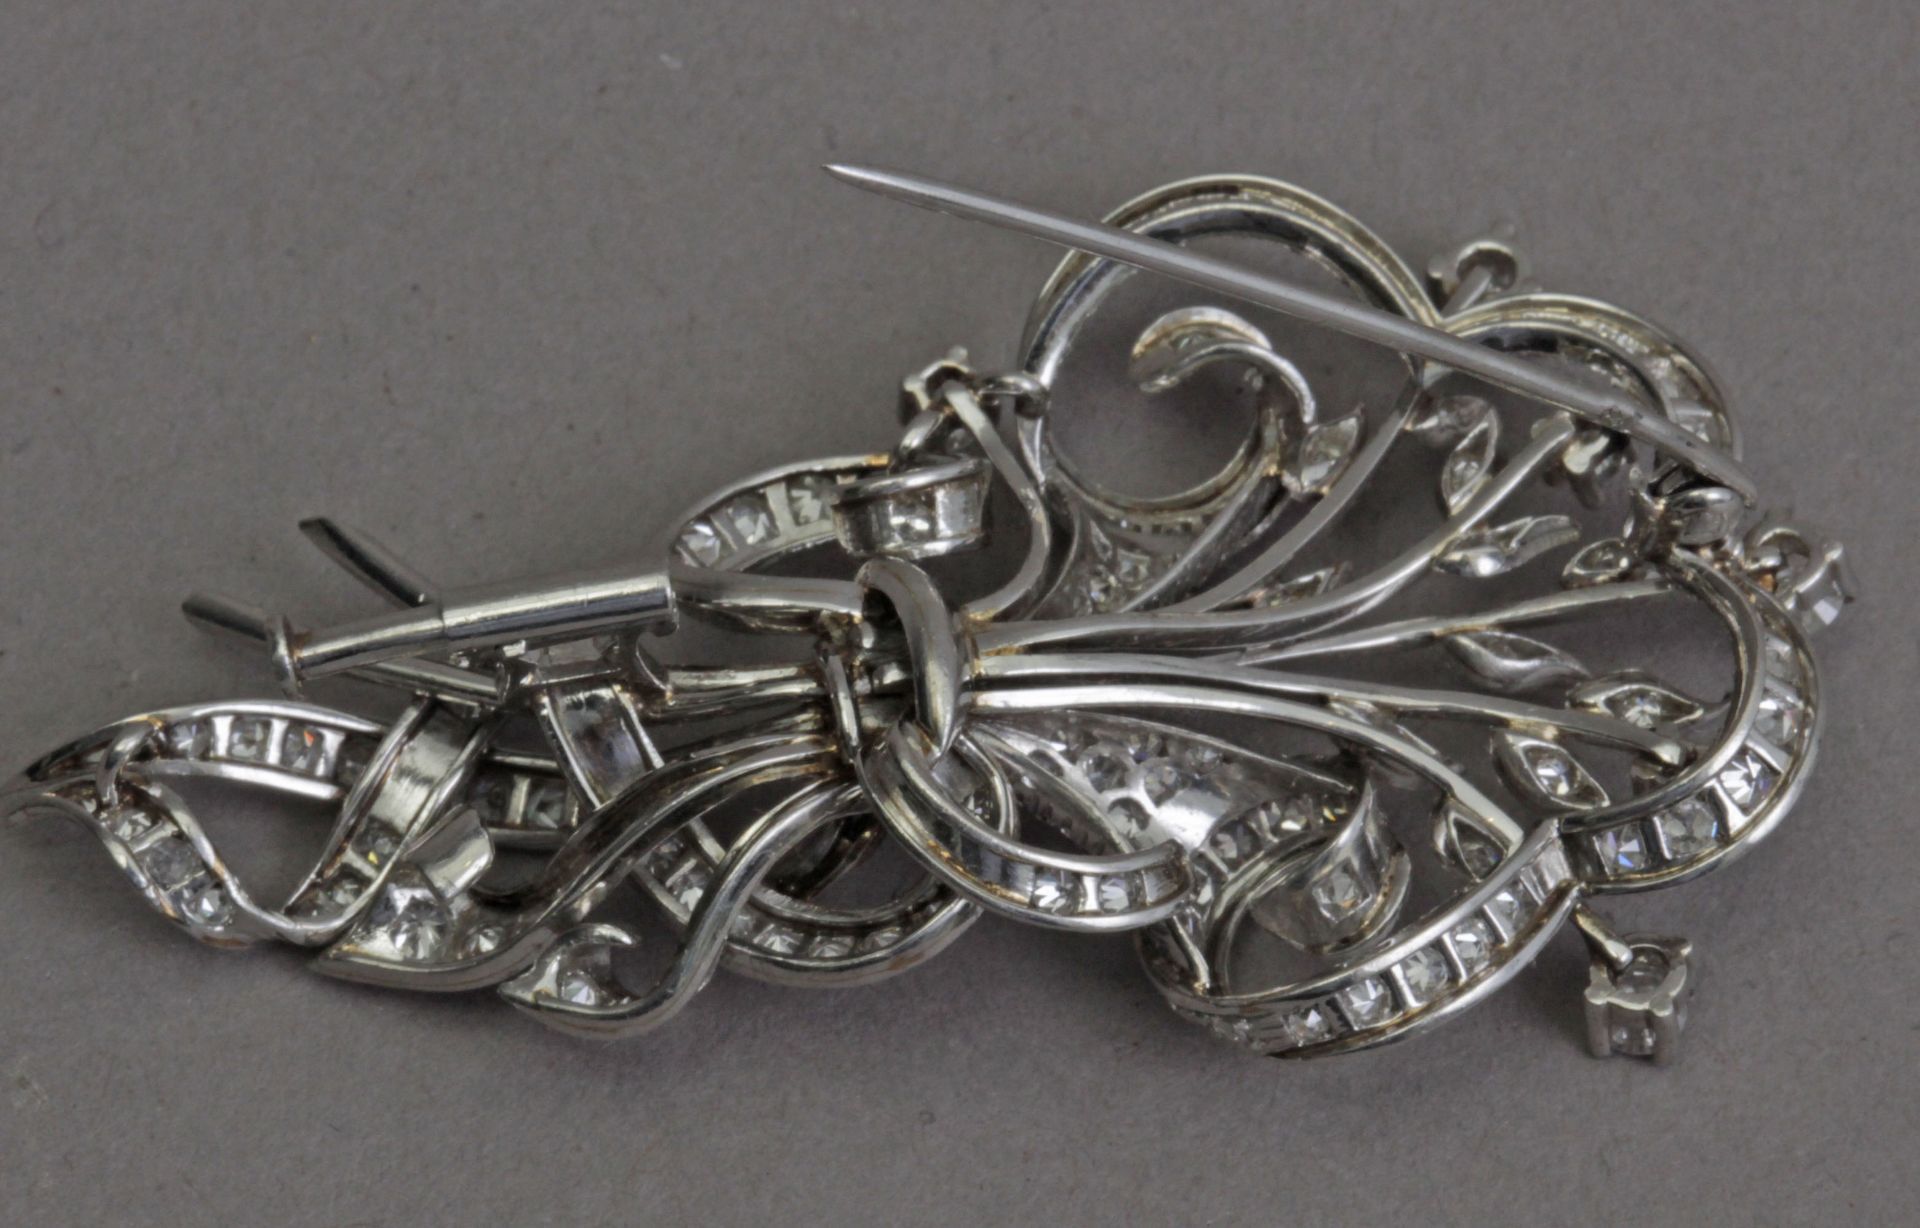 A second third of 20th century diamond brooch in a platinum setting - Image 3 of 3